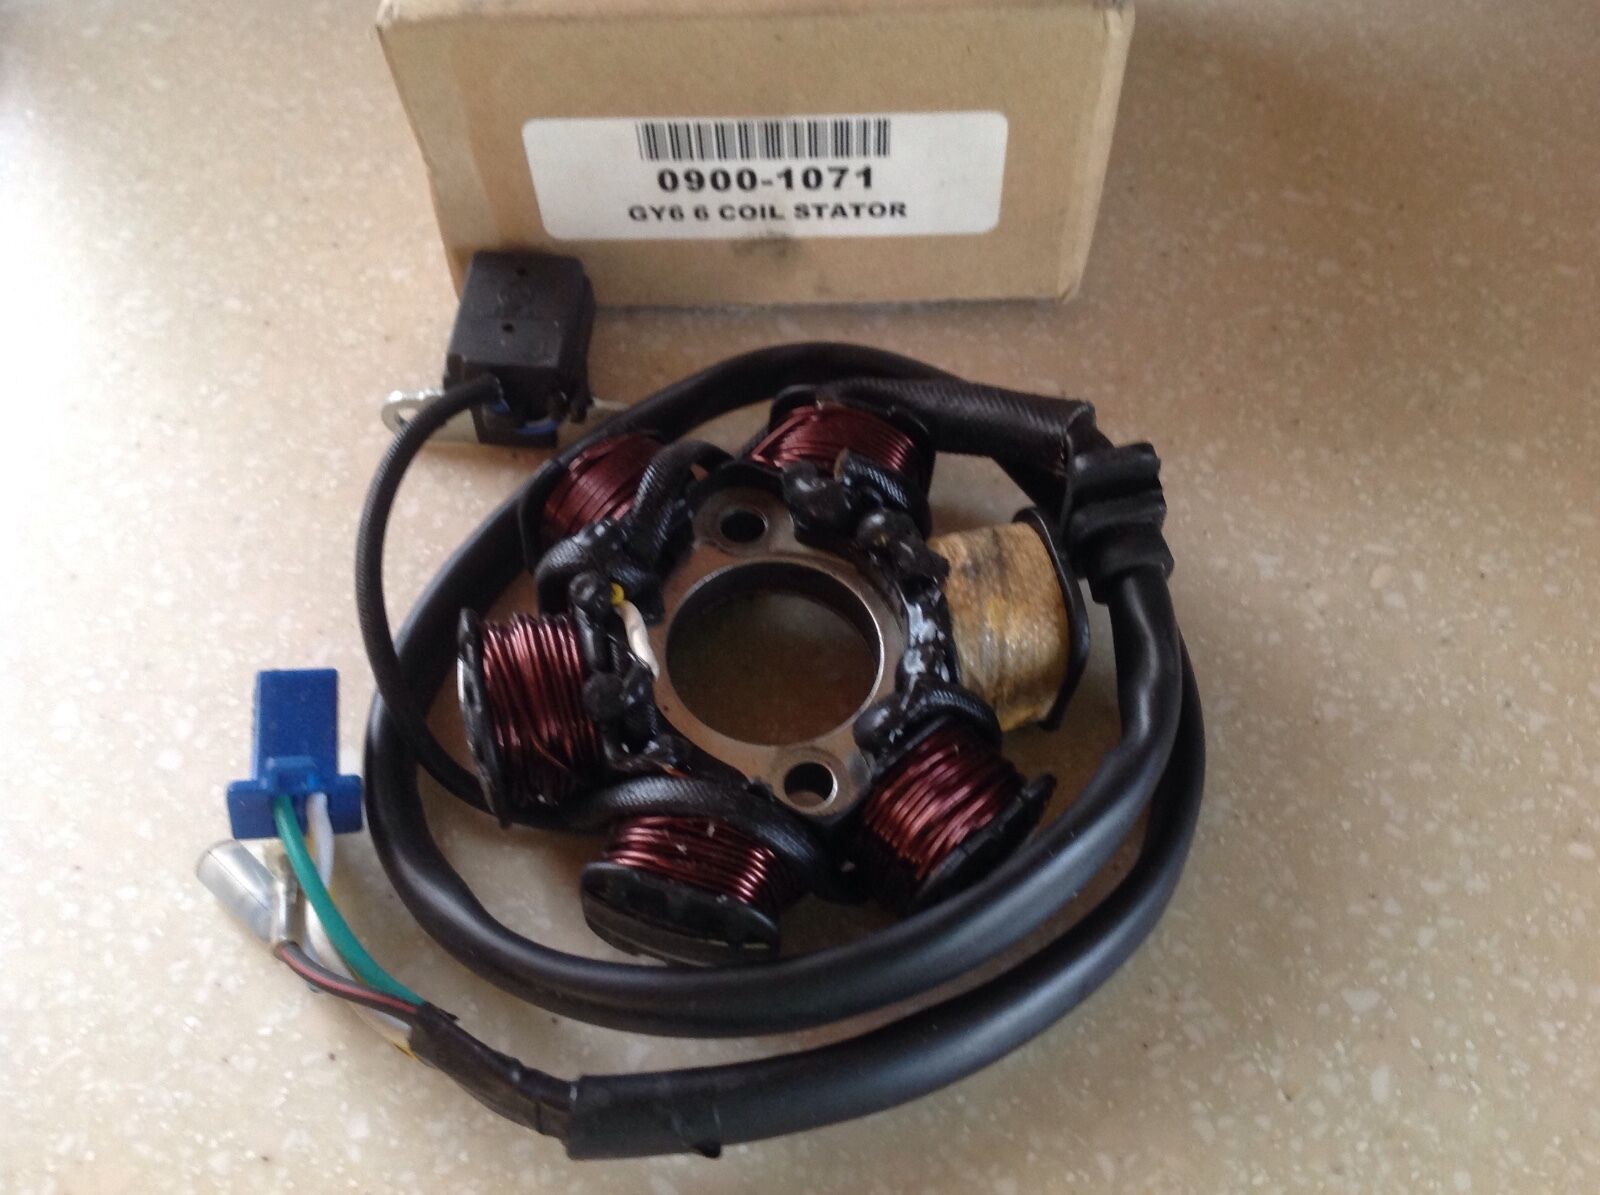 Gy6  6 Coil Stator 0900-1071 Scooter Nos